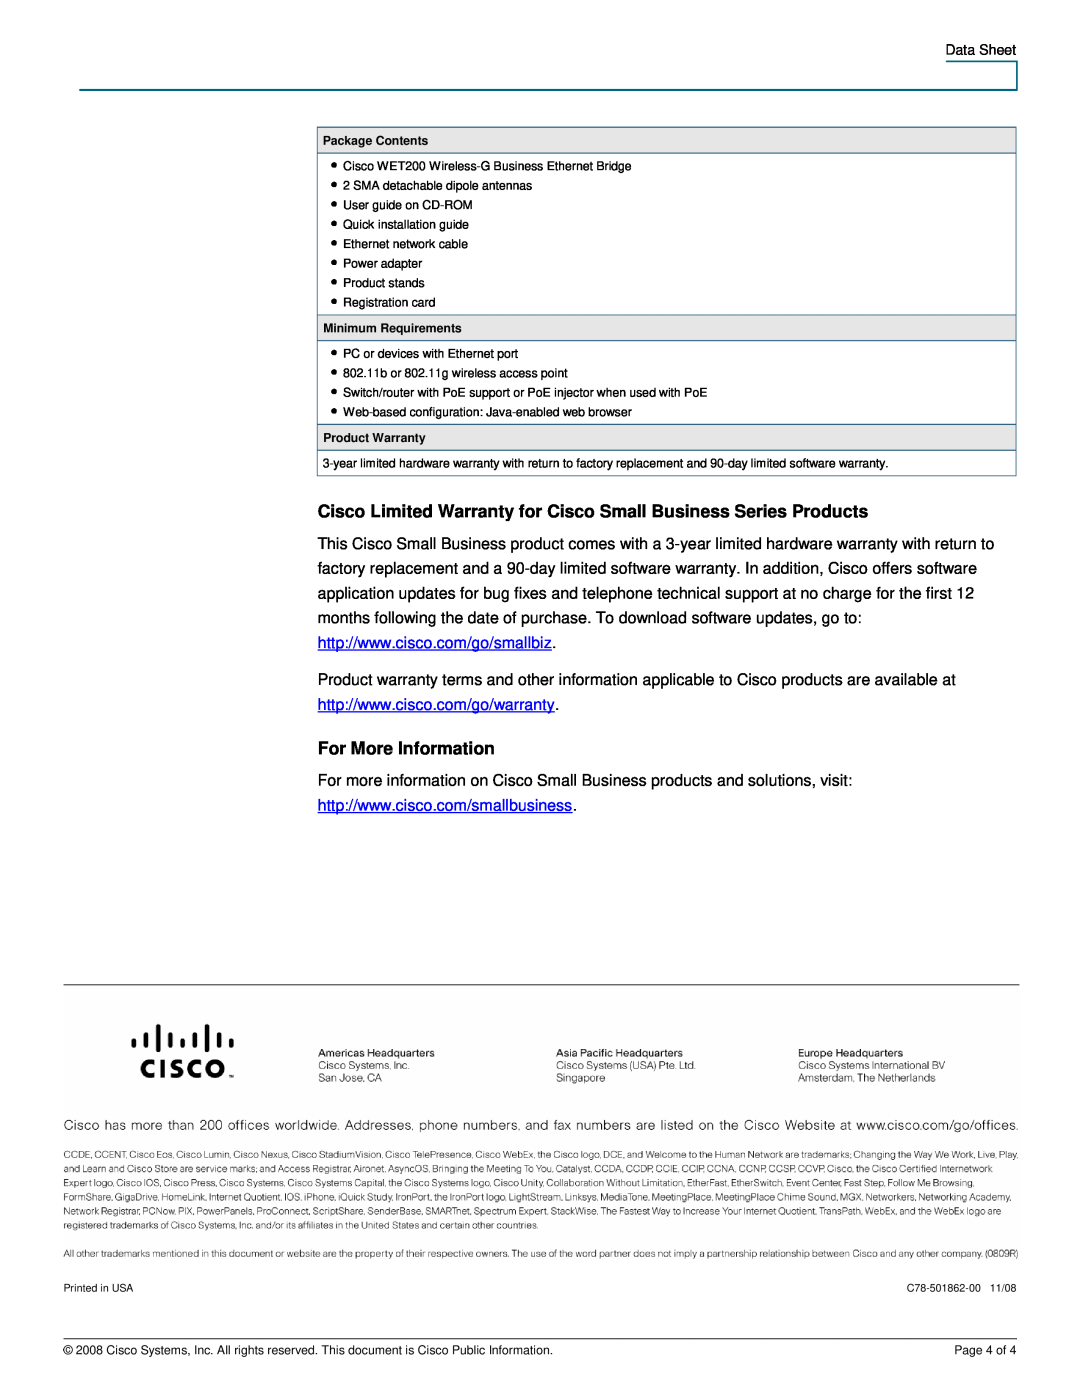 Cisco Systems WET200 manual Cisco Limited Warranty for Cisco Small Business Series Products, For More Information 